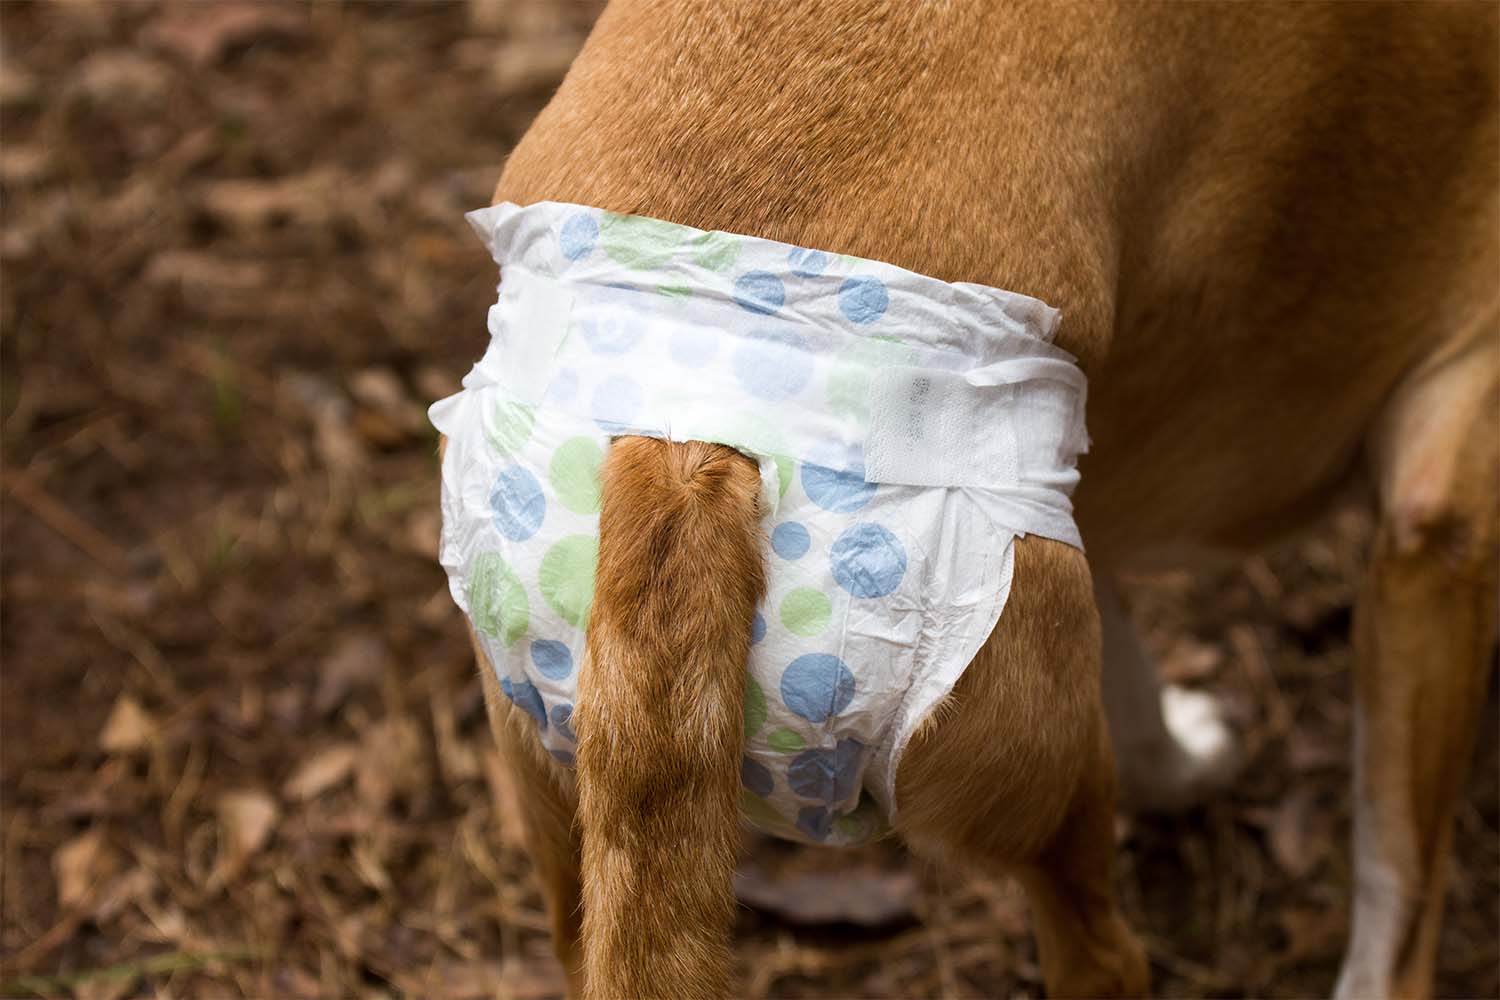 diy-dog-diaper-how-to-make-a-homemade-diaper-for-a-dog-who-is-in-heat